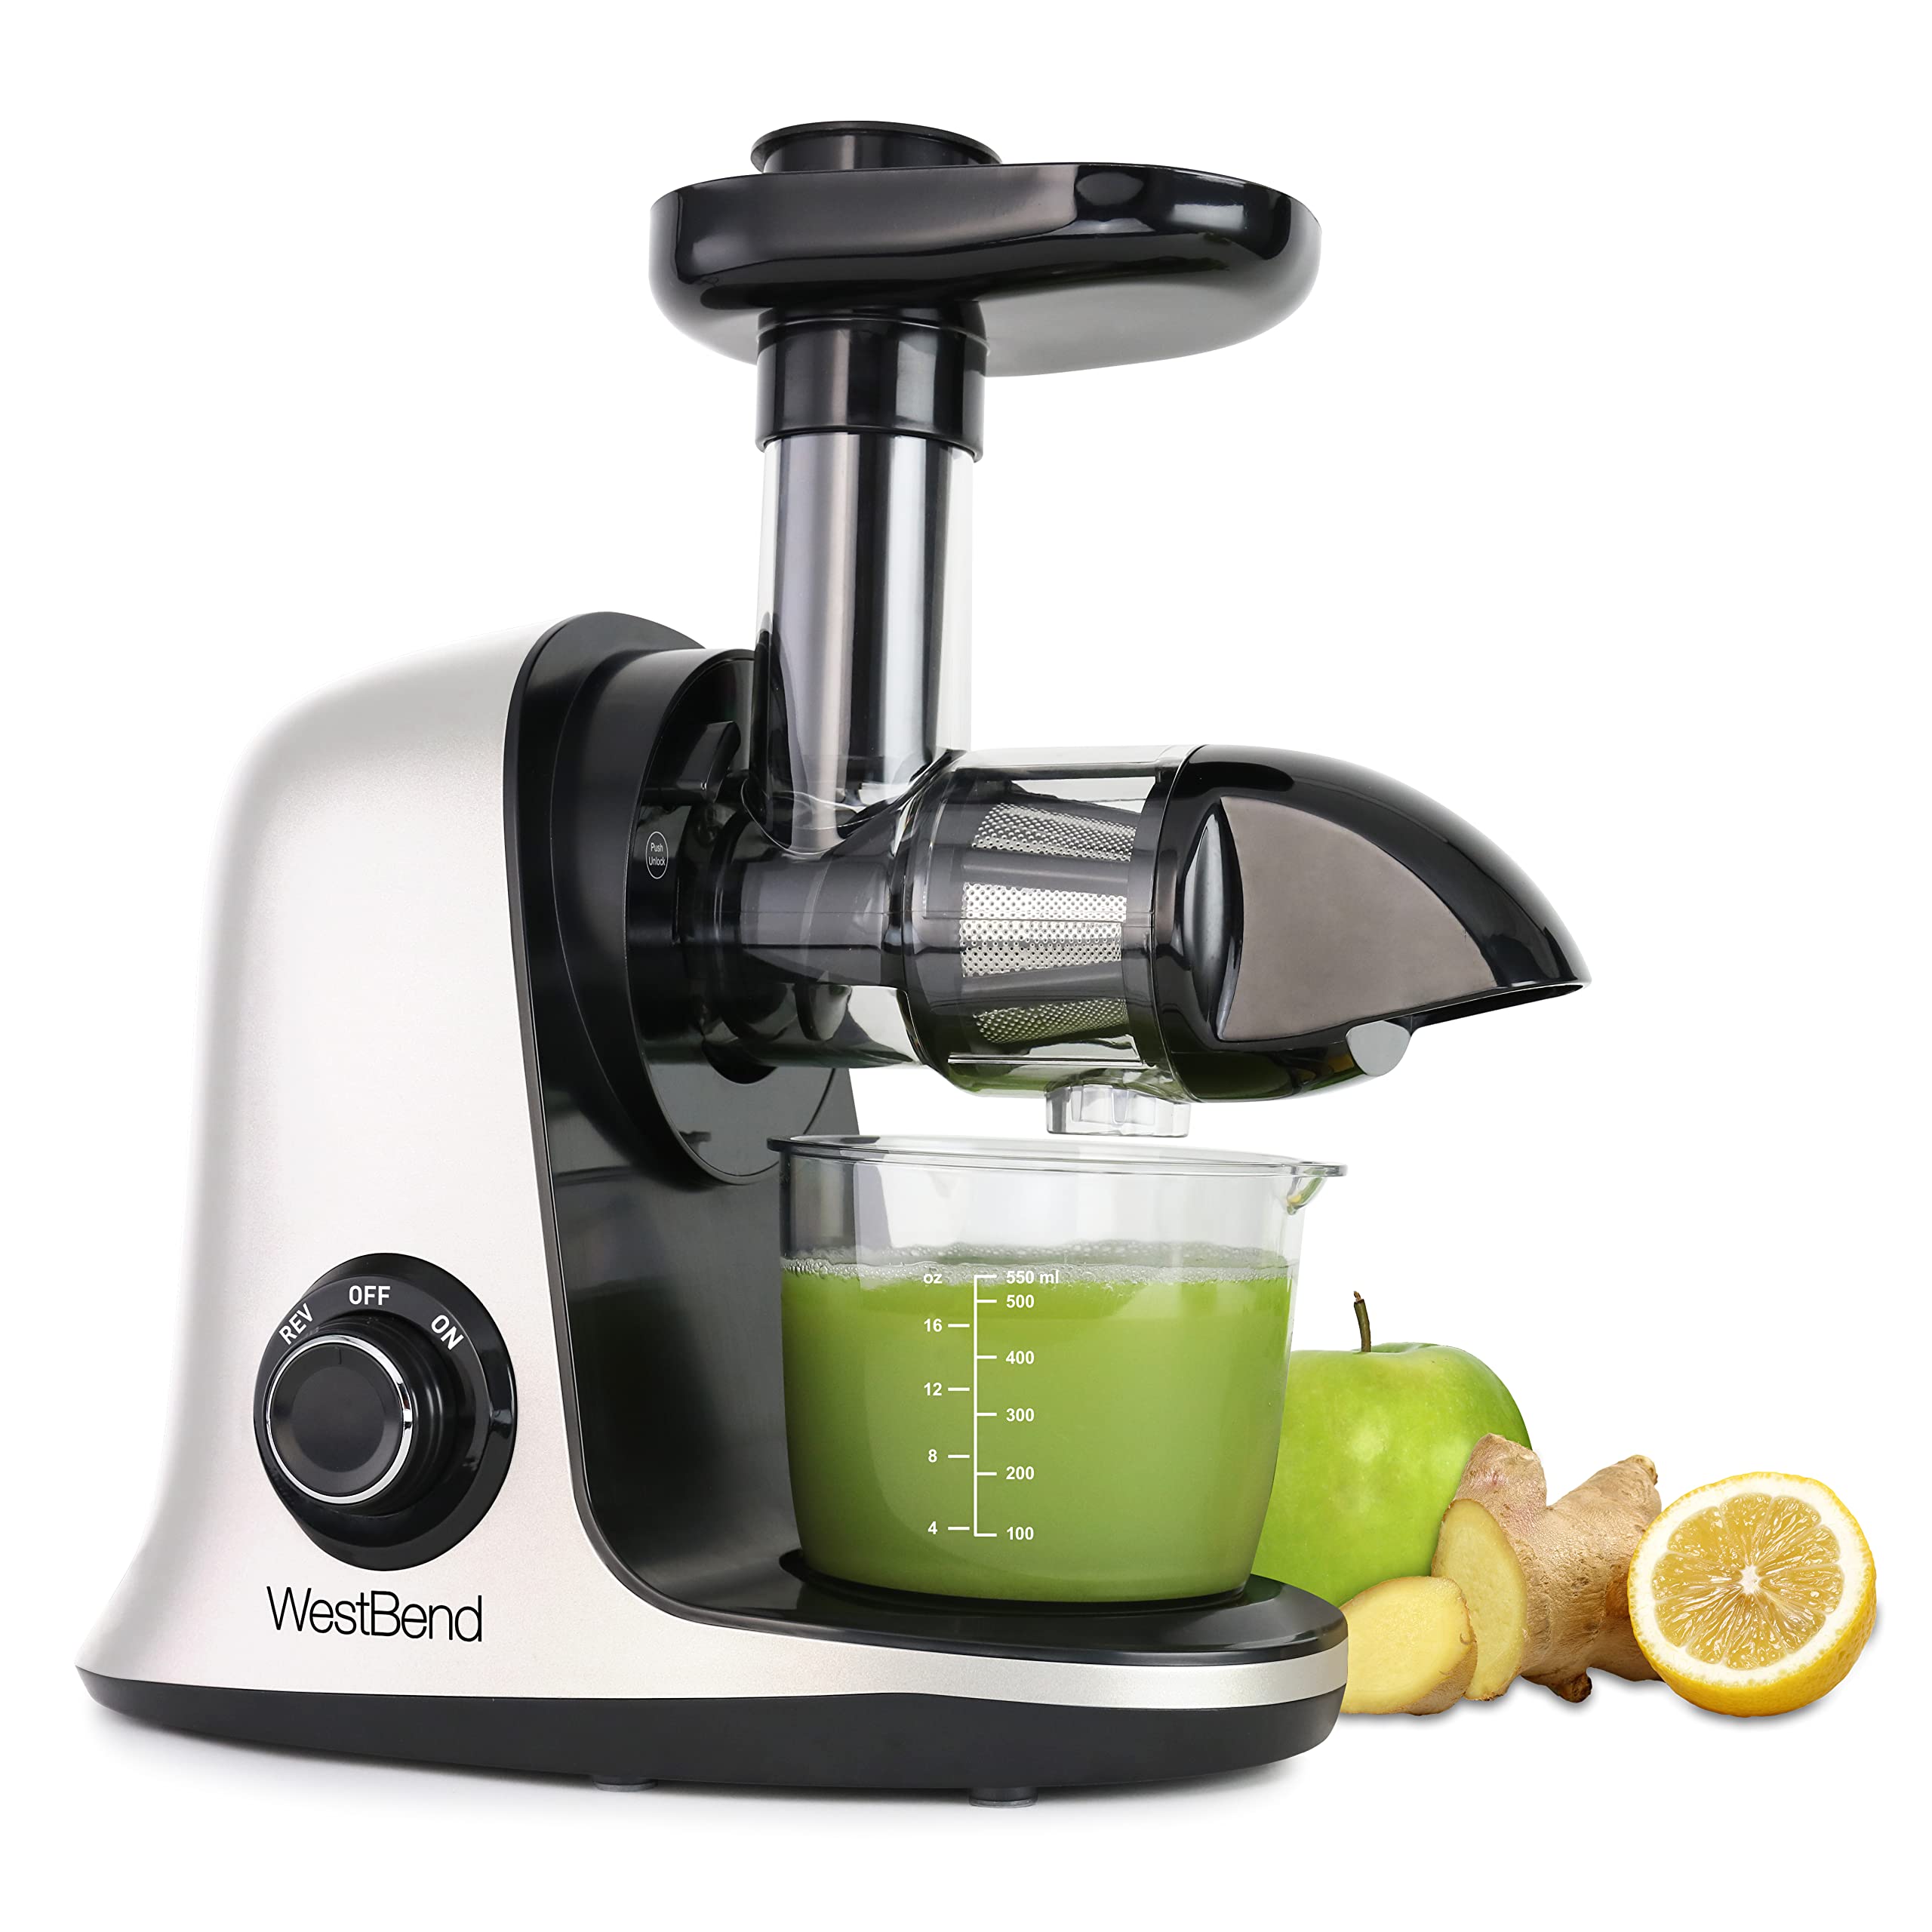 West Bend Juicer Cold Press Masticating For Juicing Fruits Vegetables and Greens, 150-Watts, White (Renewed Premium)